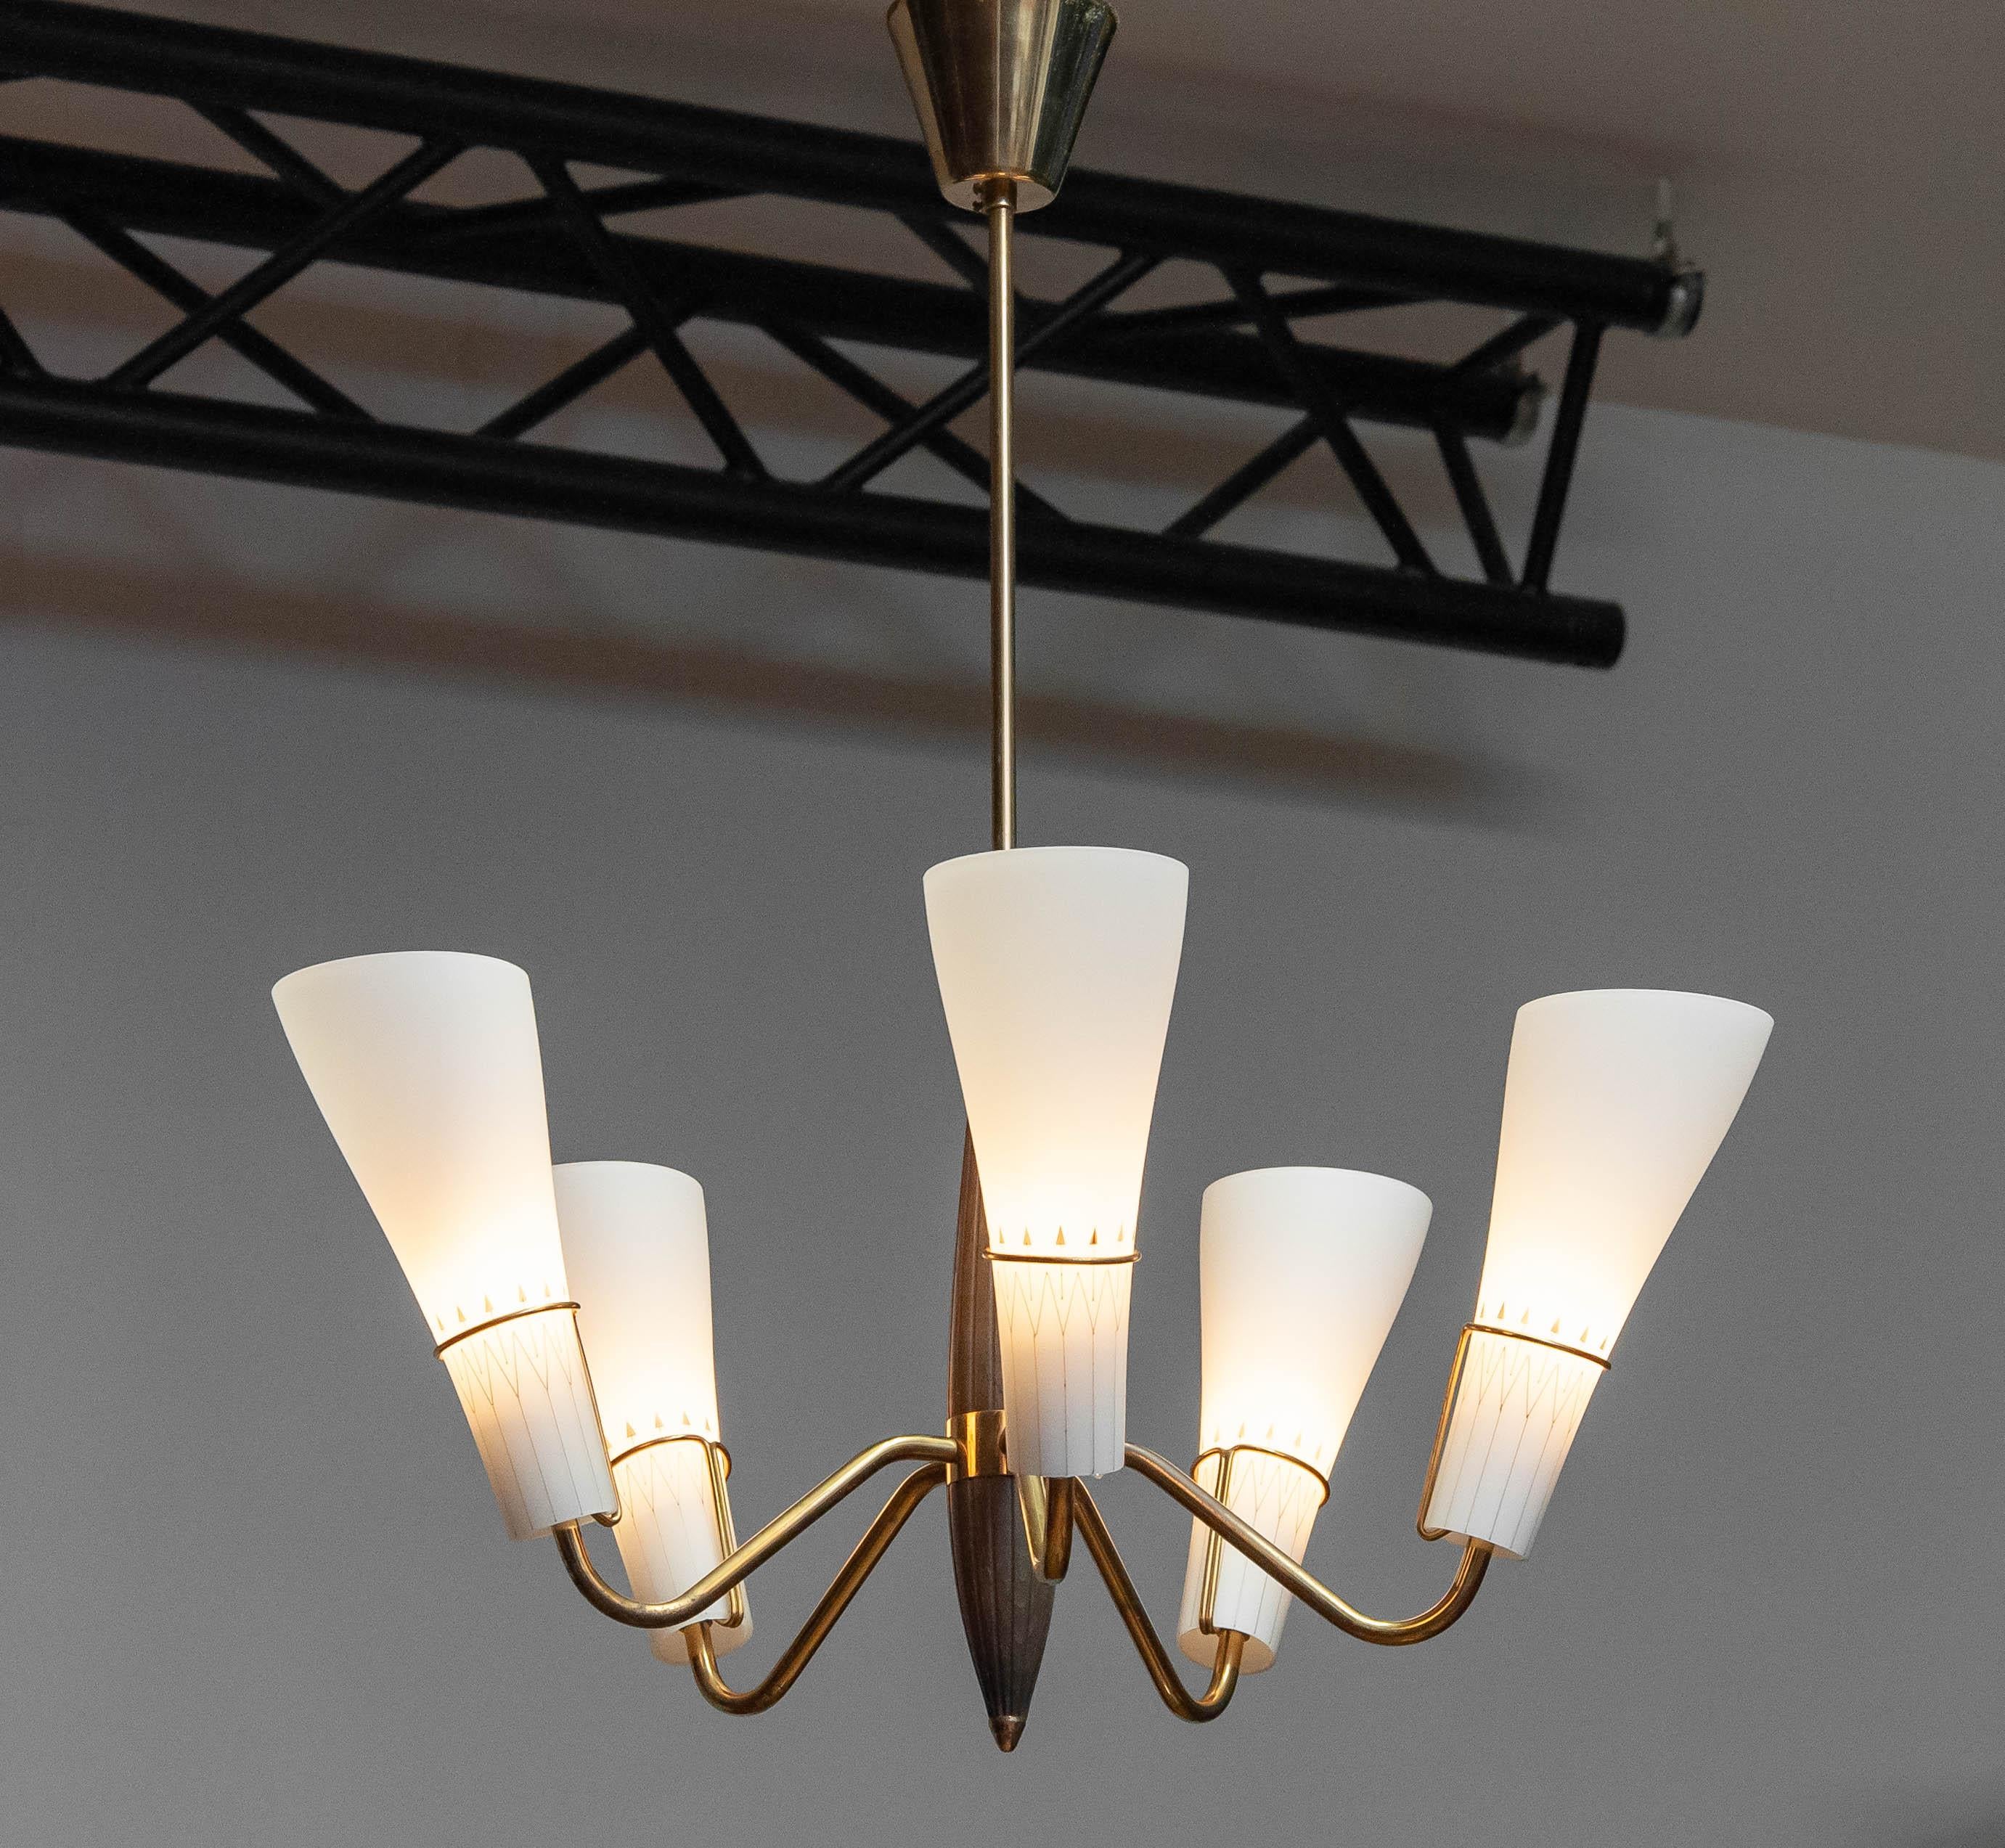 Mid-Century Modern 1950s Swedish Brass With Beech Five Arm Chandelier With Frosted Art Glass Shades